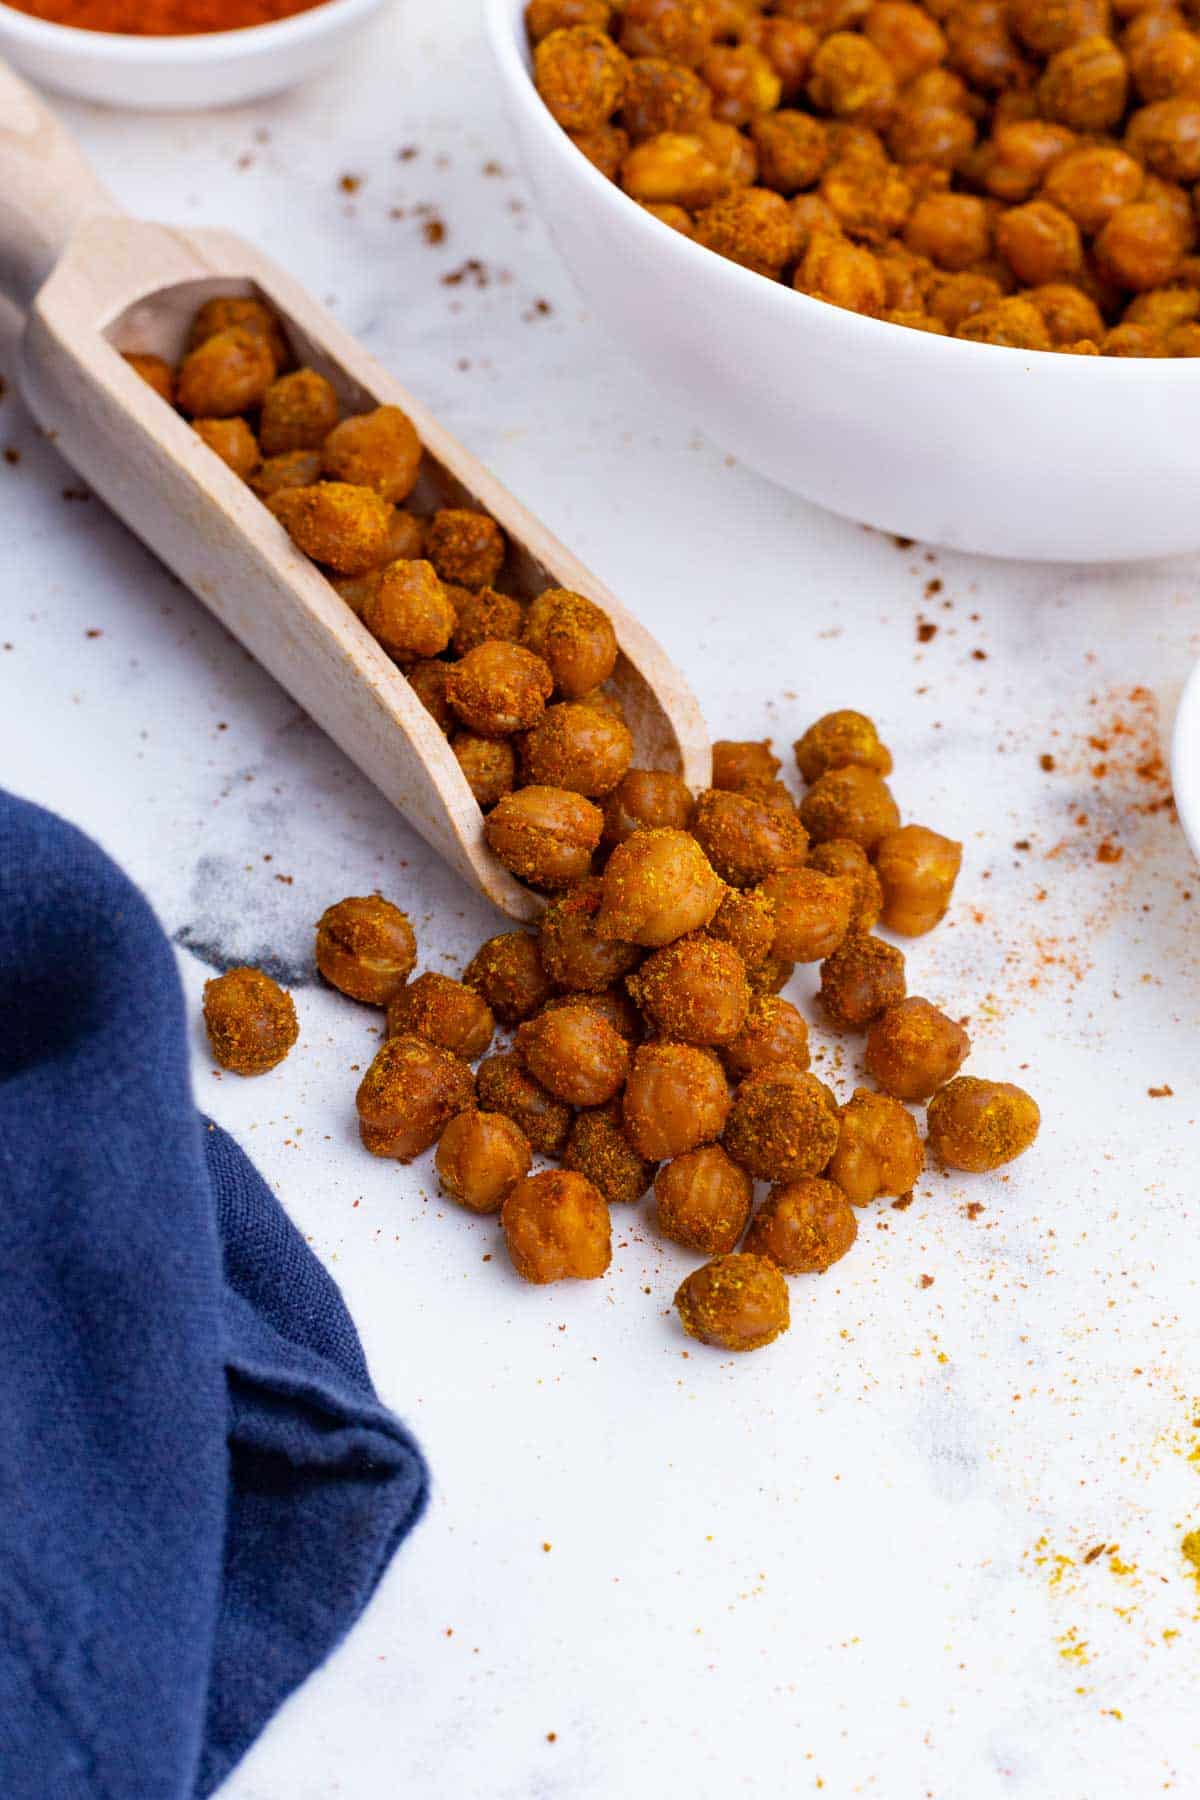 Oven-roasted chickpeas are a healthy and delicious snack.